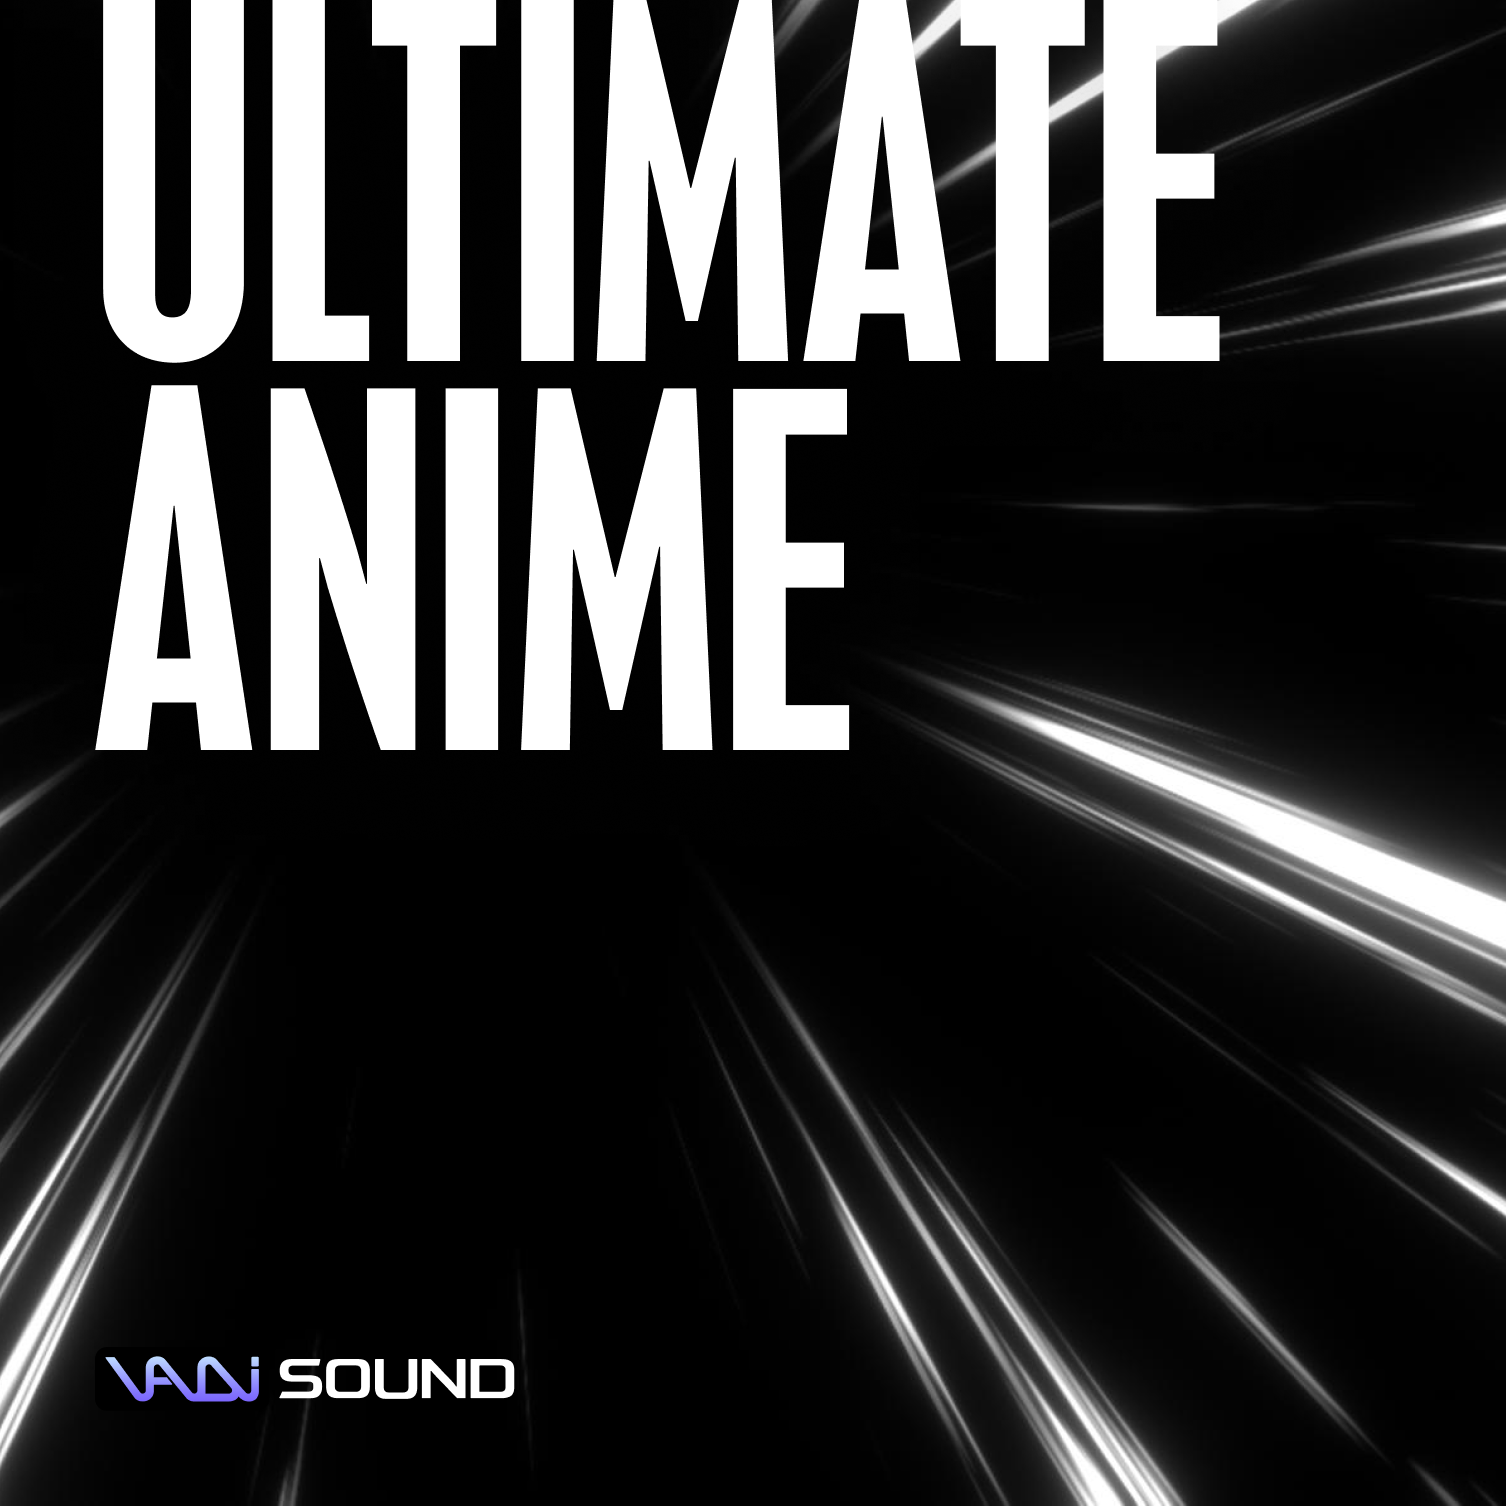 The image portrays a dark background featuring the phrase 'ultimate anime' and represents a sound effects library on Sonniss.